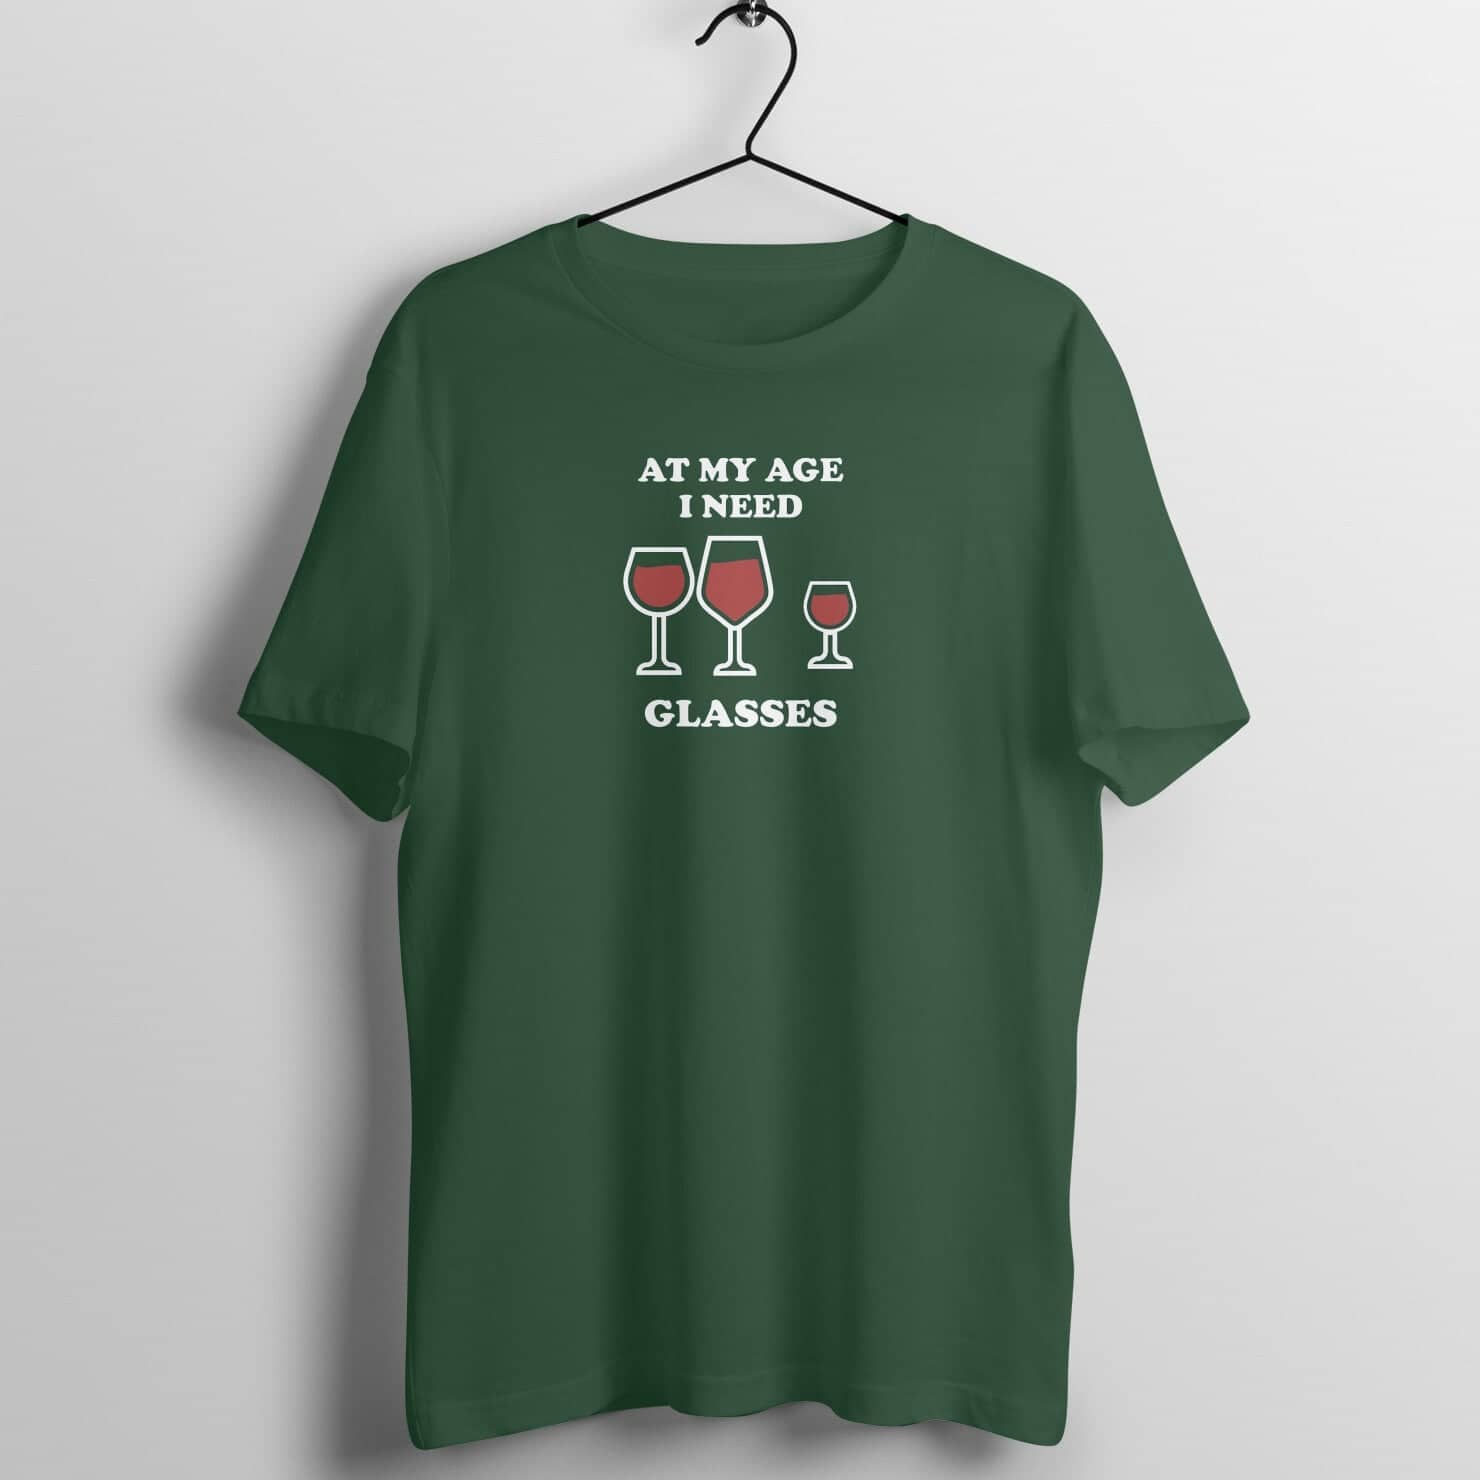 At My Age I Need Glasses Funny Olive Green T Shirt for Men and Women freeshipping - Catch My Drift India